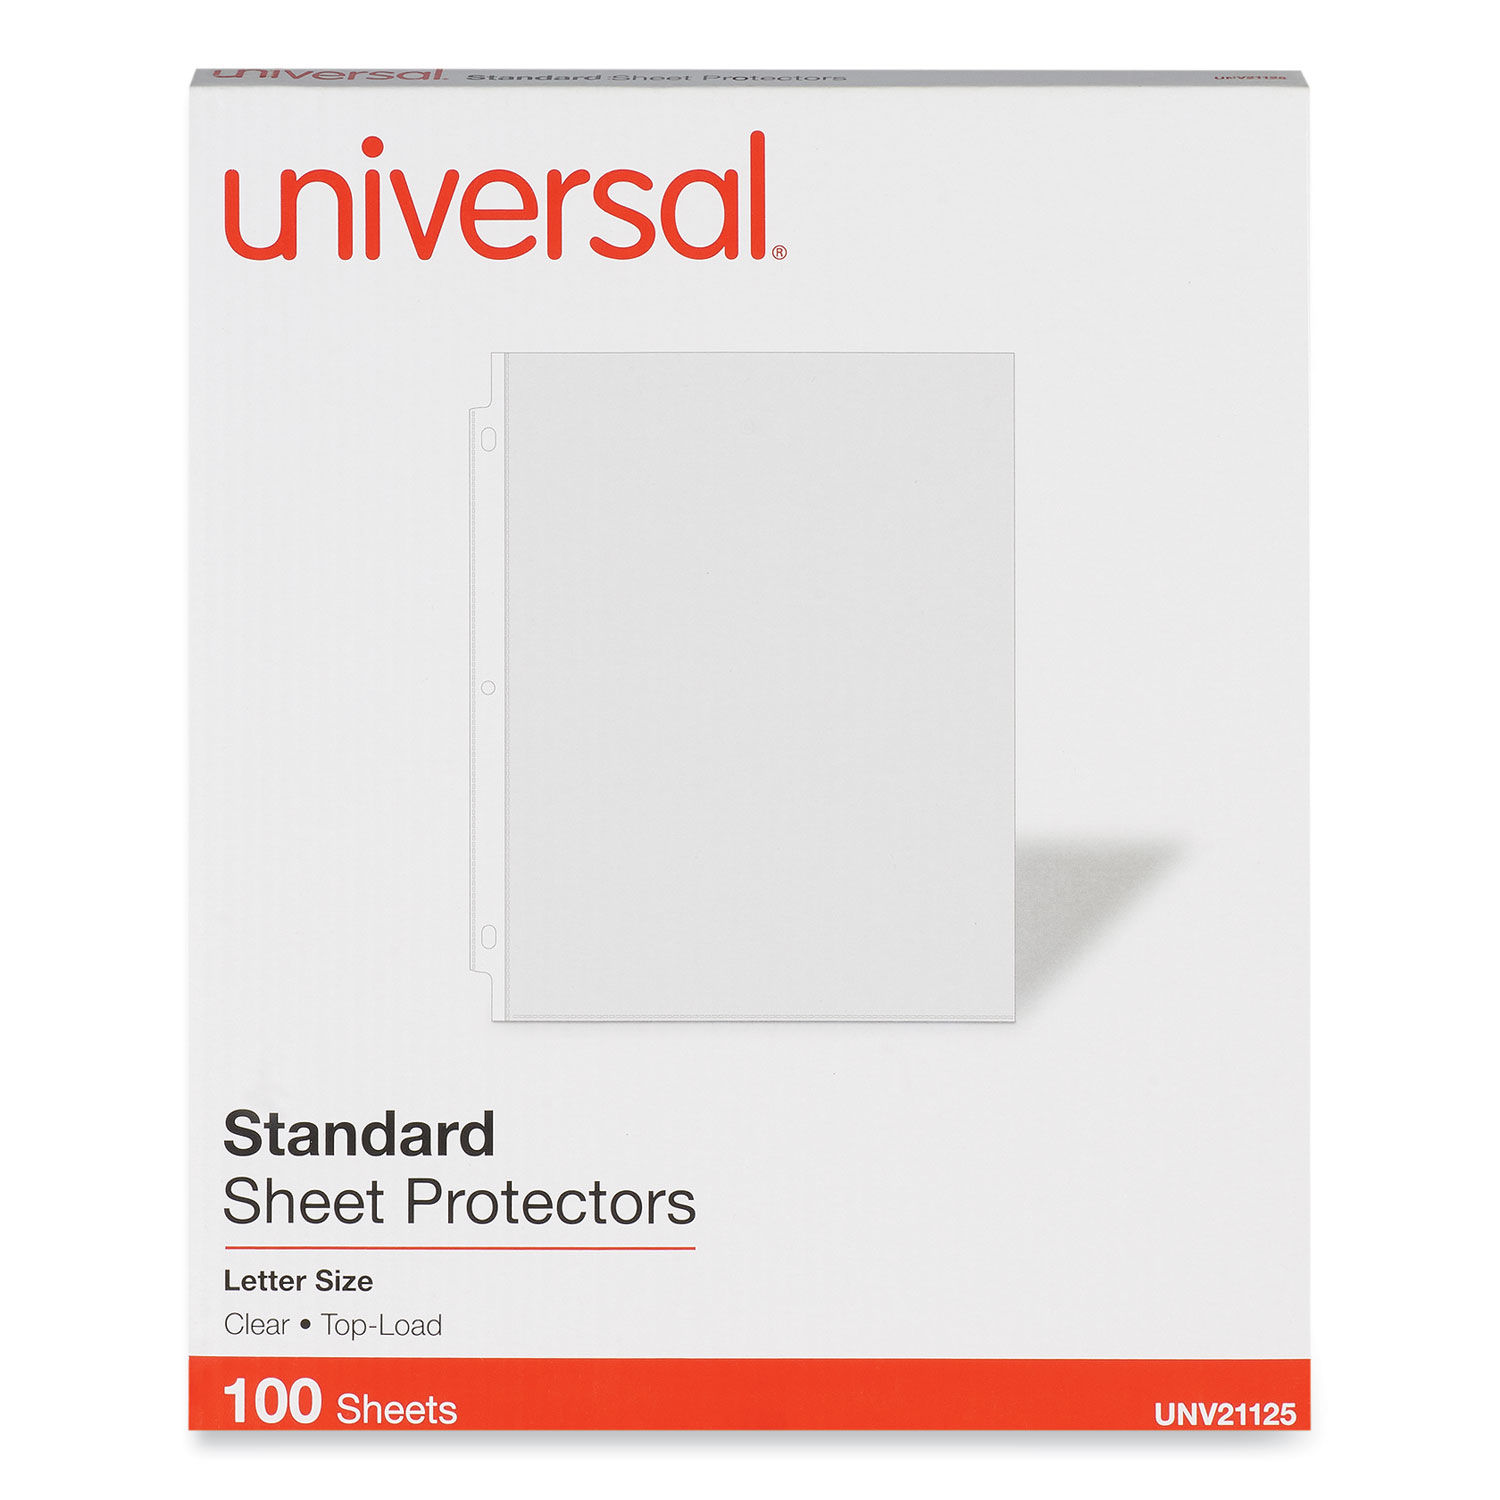 Top-Load Poly Sheet Protectors by Universal® UNV21125